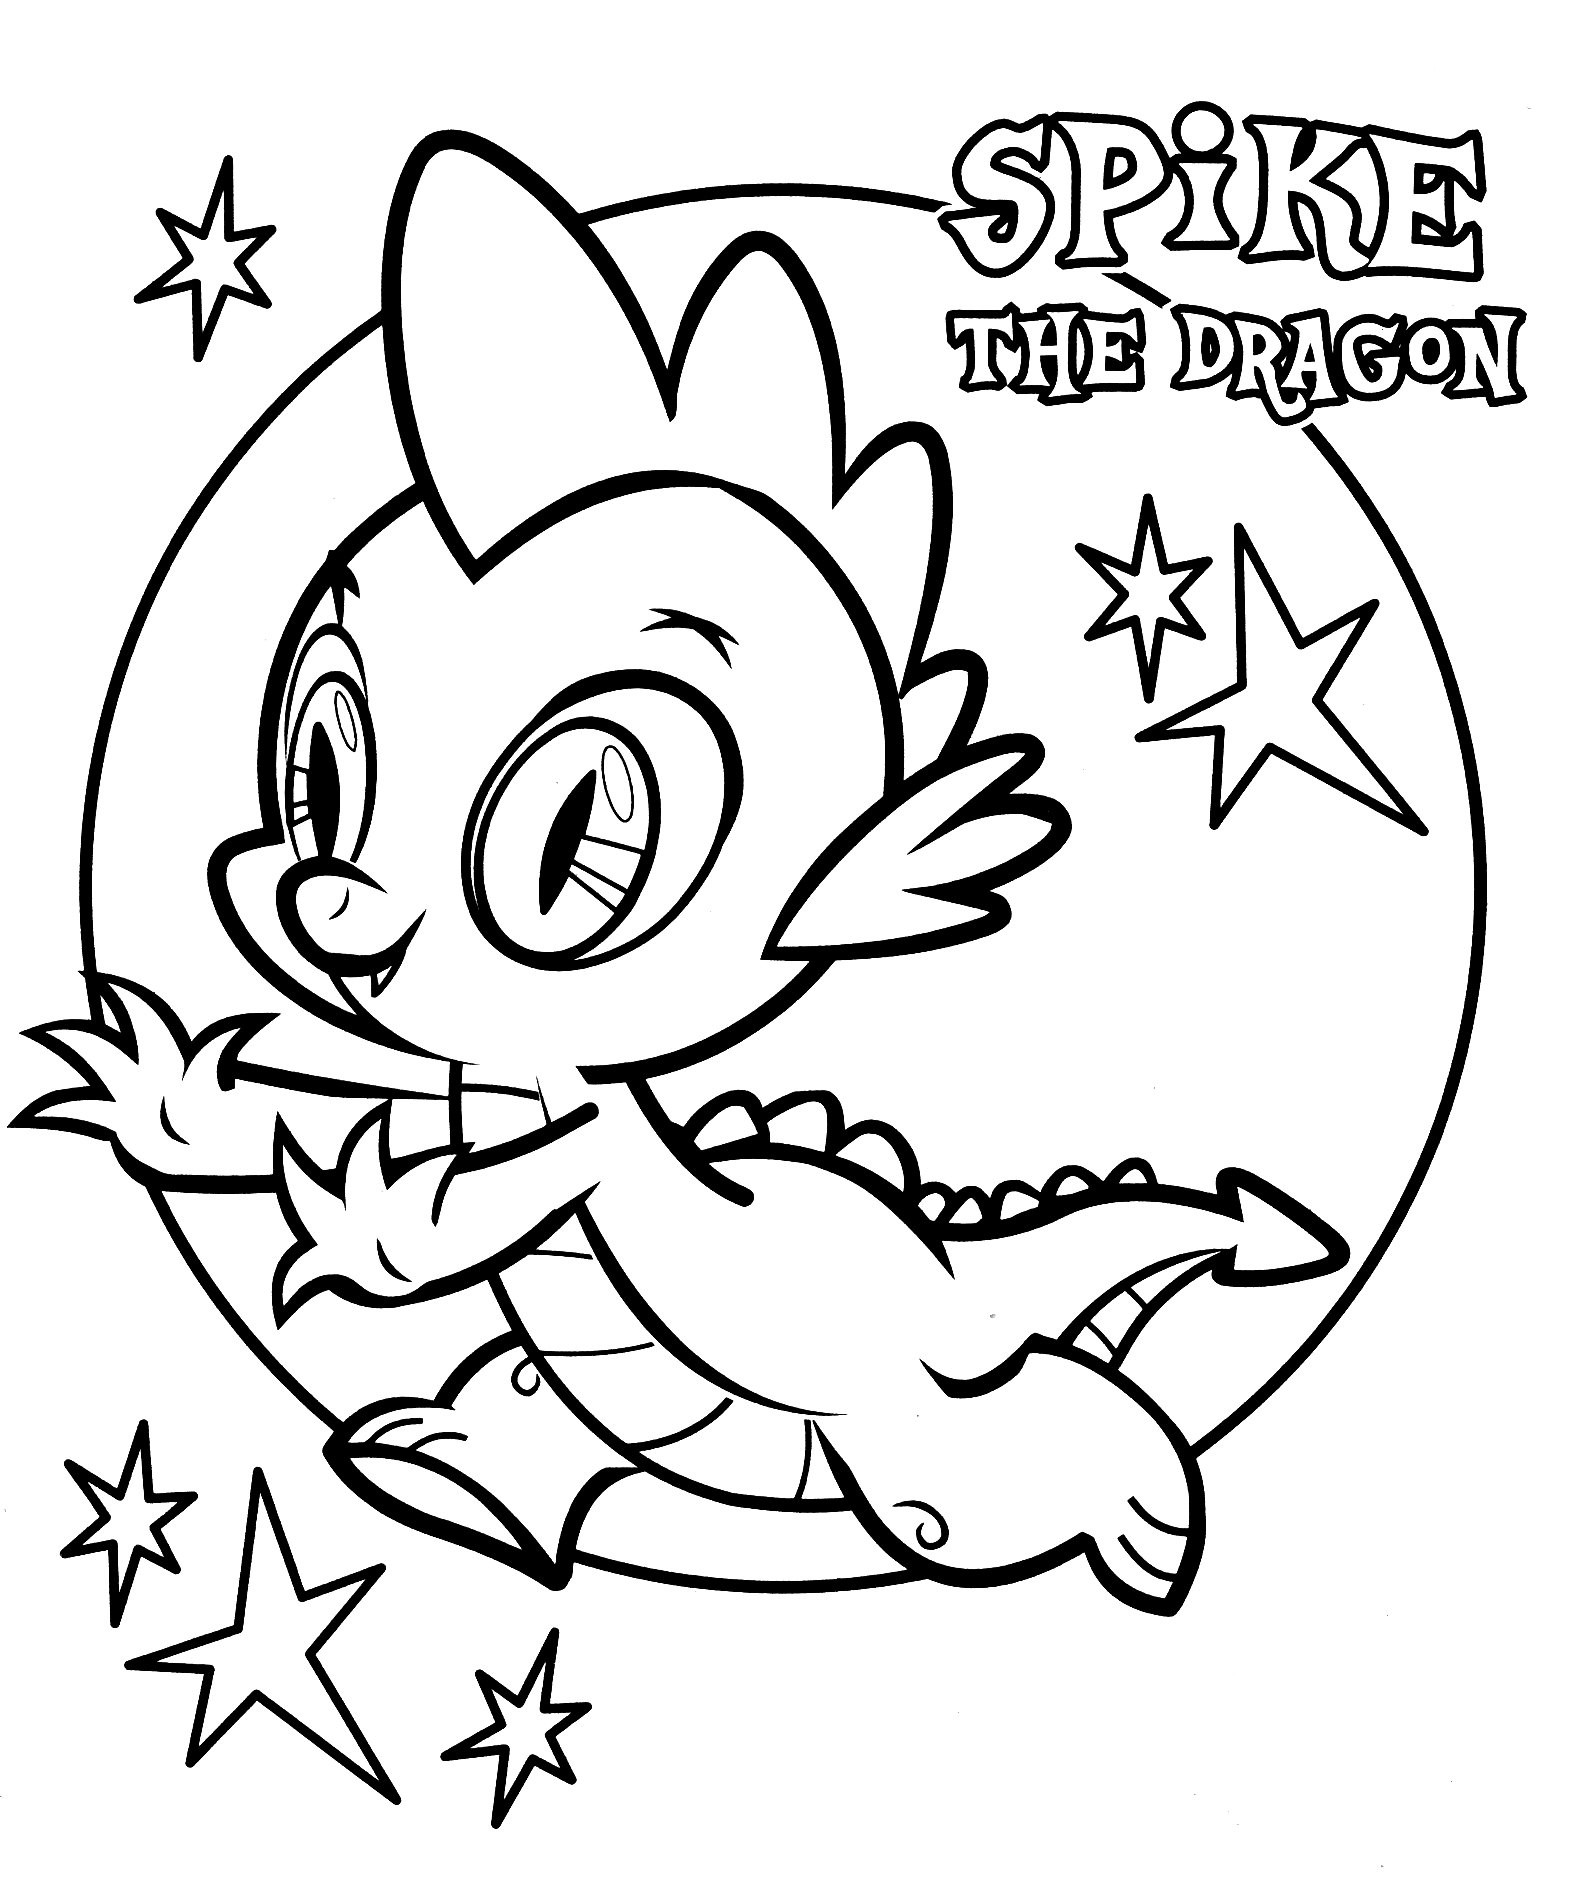 Spike My Little Pony Coloring Page at GetColoringscom